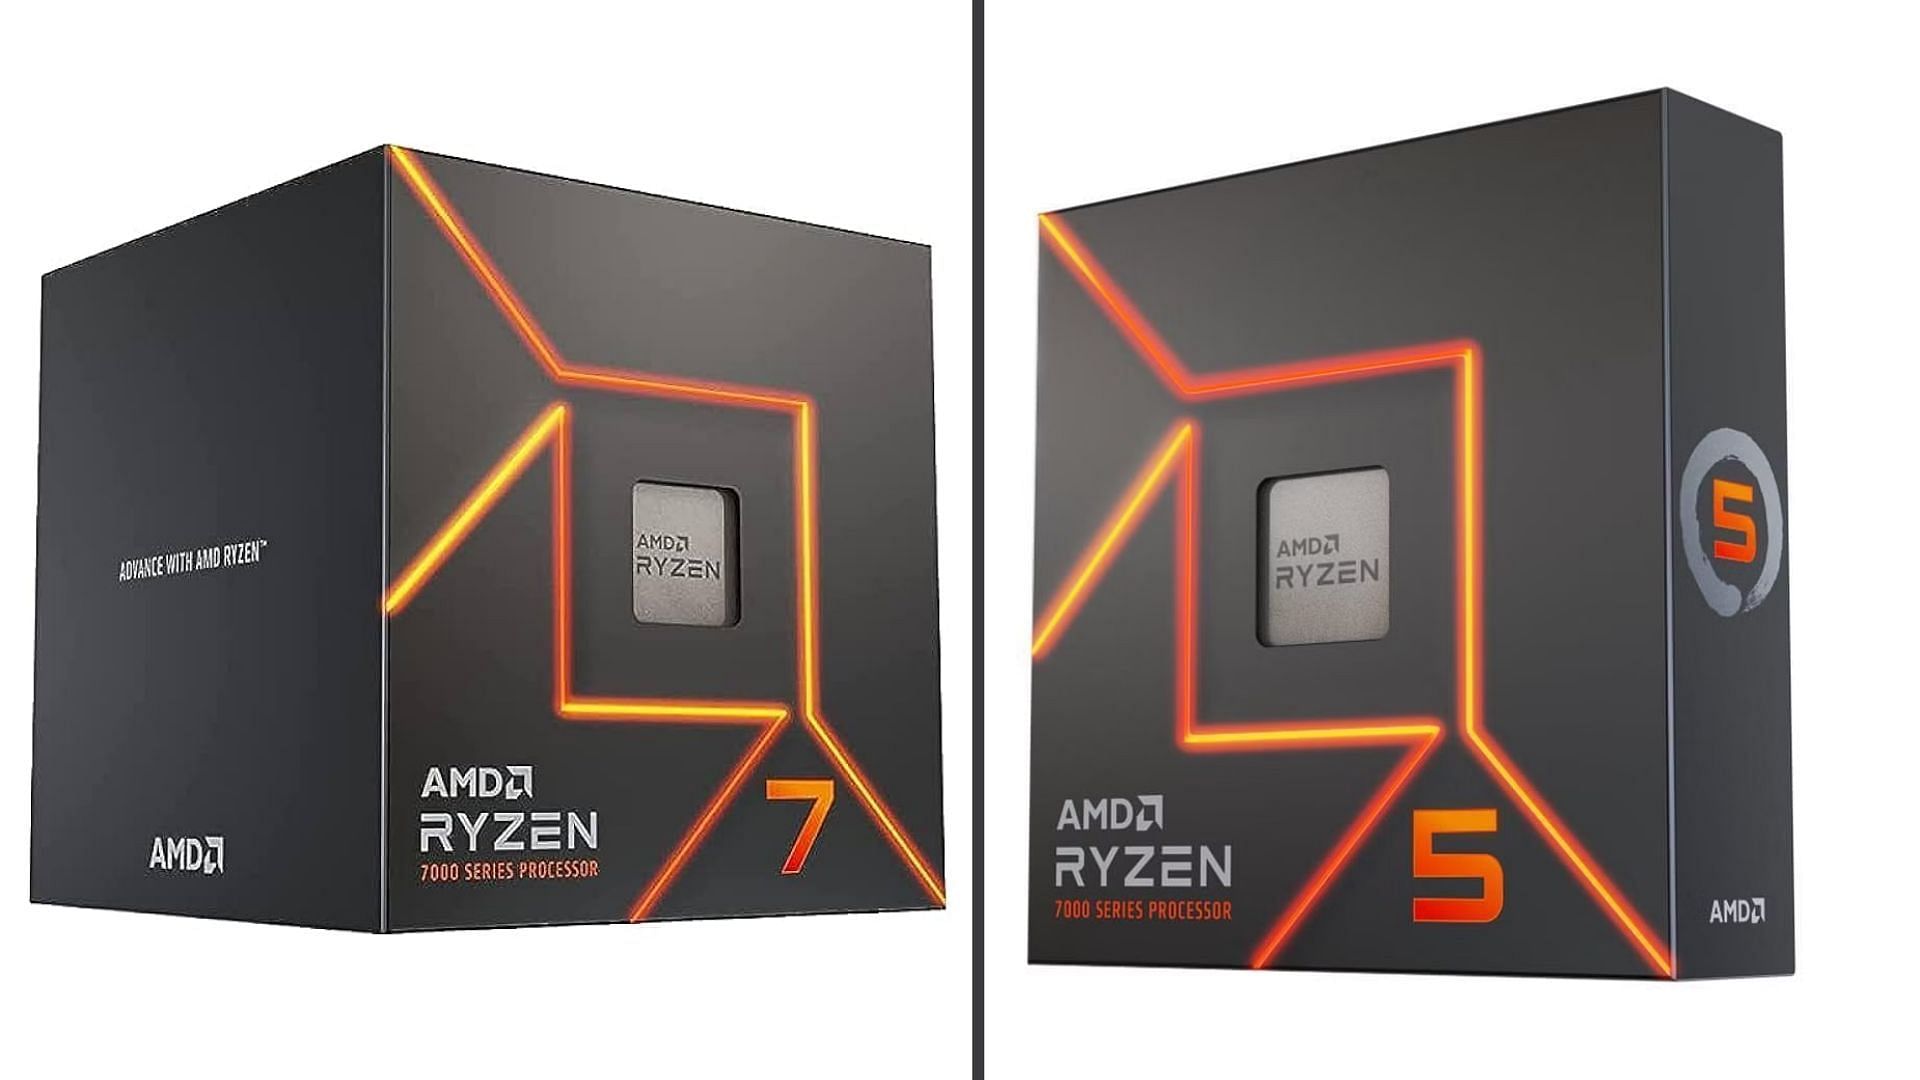 The AMD Ryzen 7 7700 and the Ryzen 5 7600X are mid-range gaming and productivity chips (Image via AMD and Amazon)